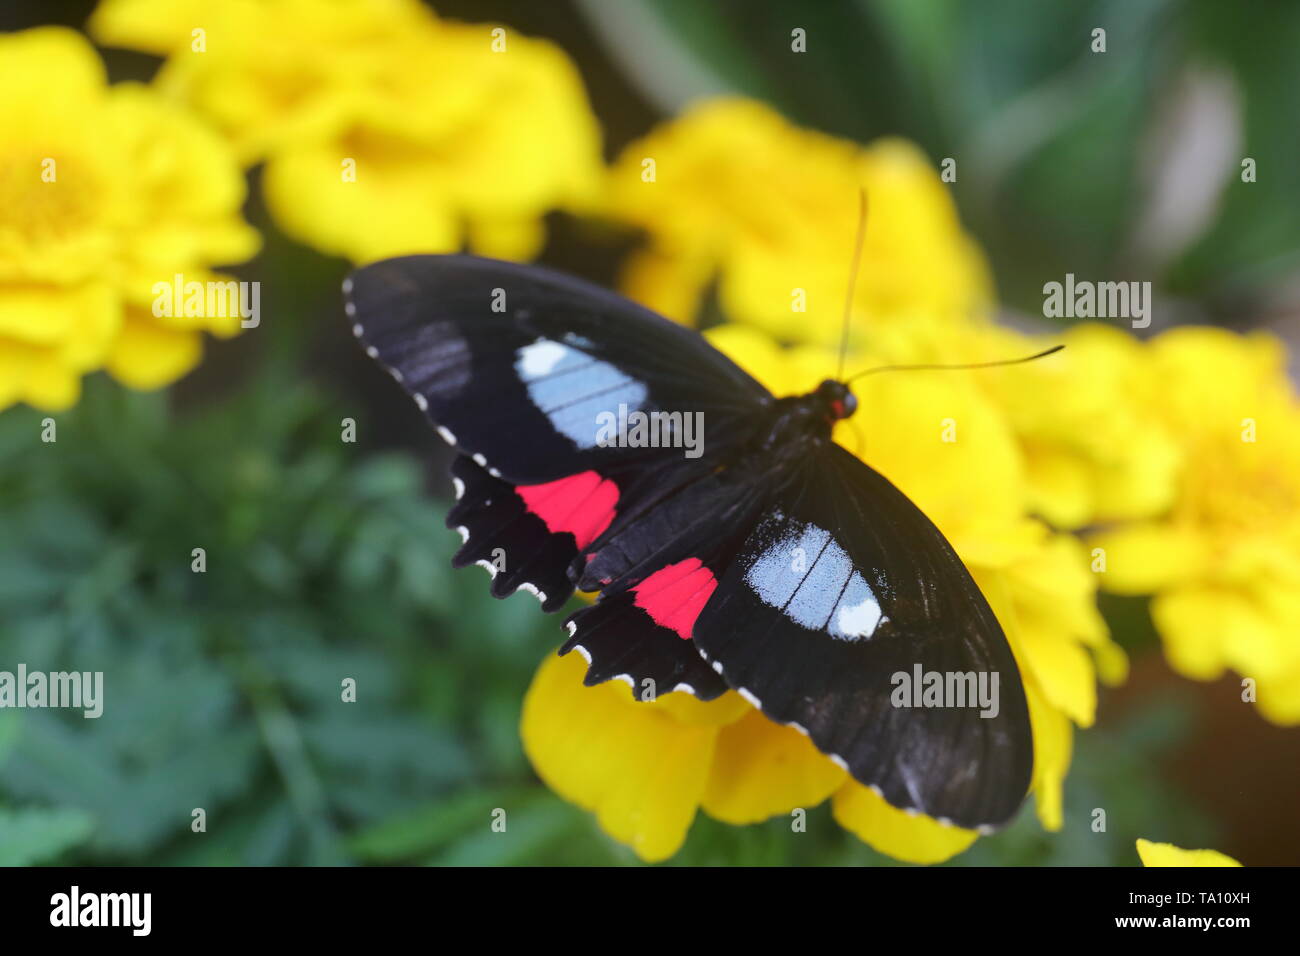 Black, scarlet, and white butterfly feeding on a yellow flower Stock Photo